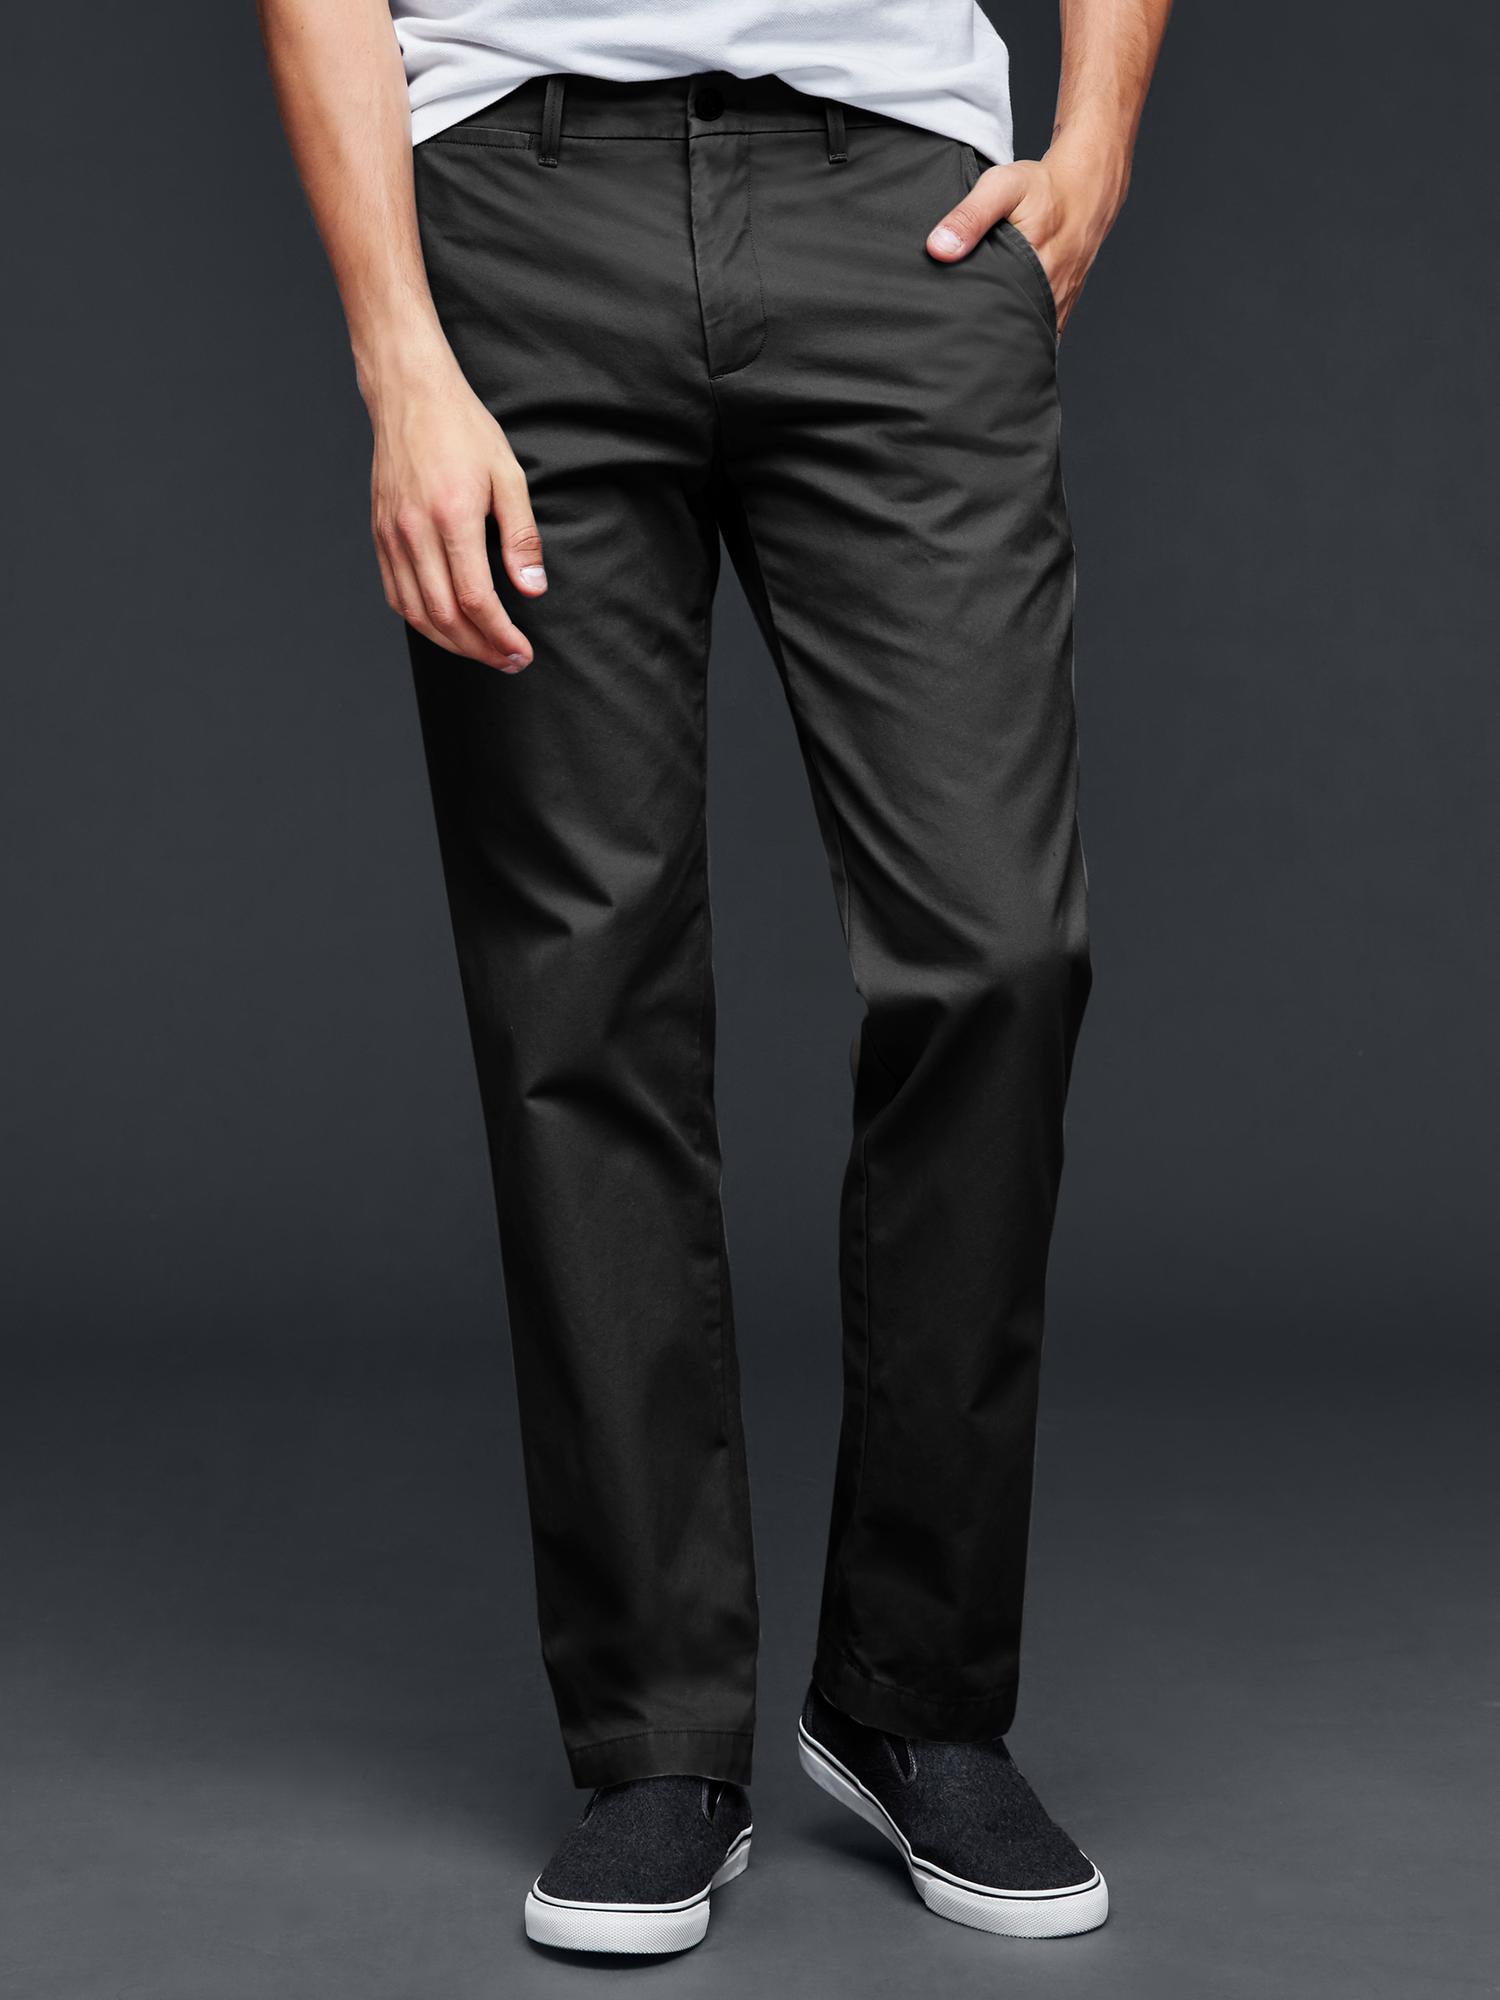 Bought my first pair of mens pants today (gap modern khakis straight fit  with flex). Open to styling suggestions : r/lesbianfashionadvice